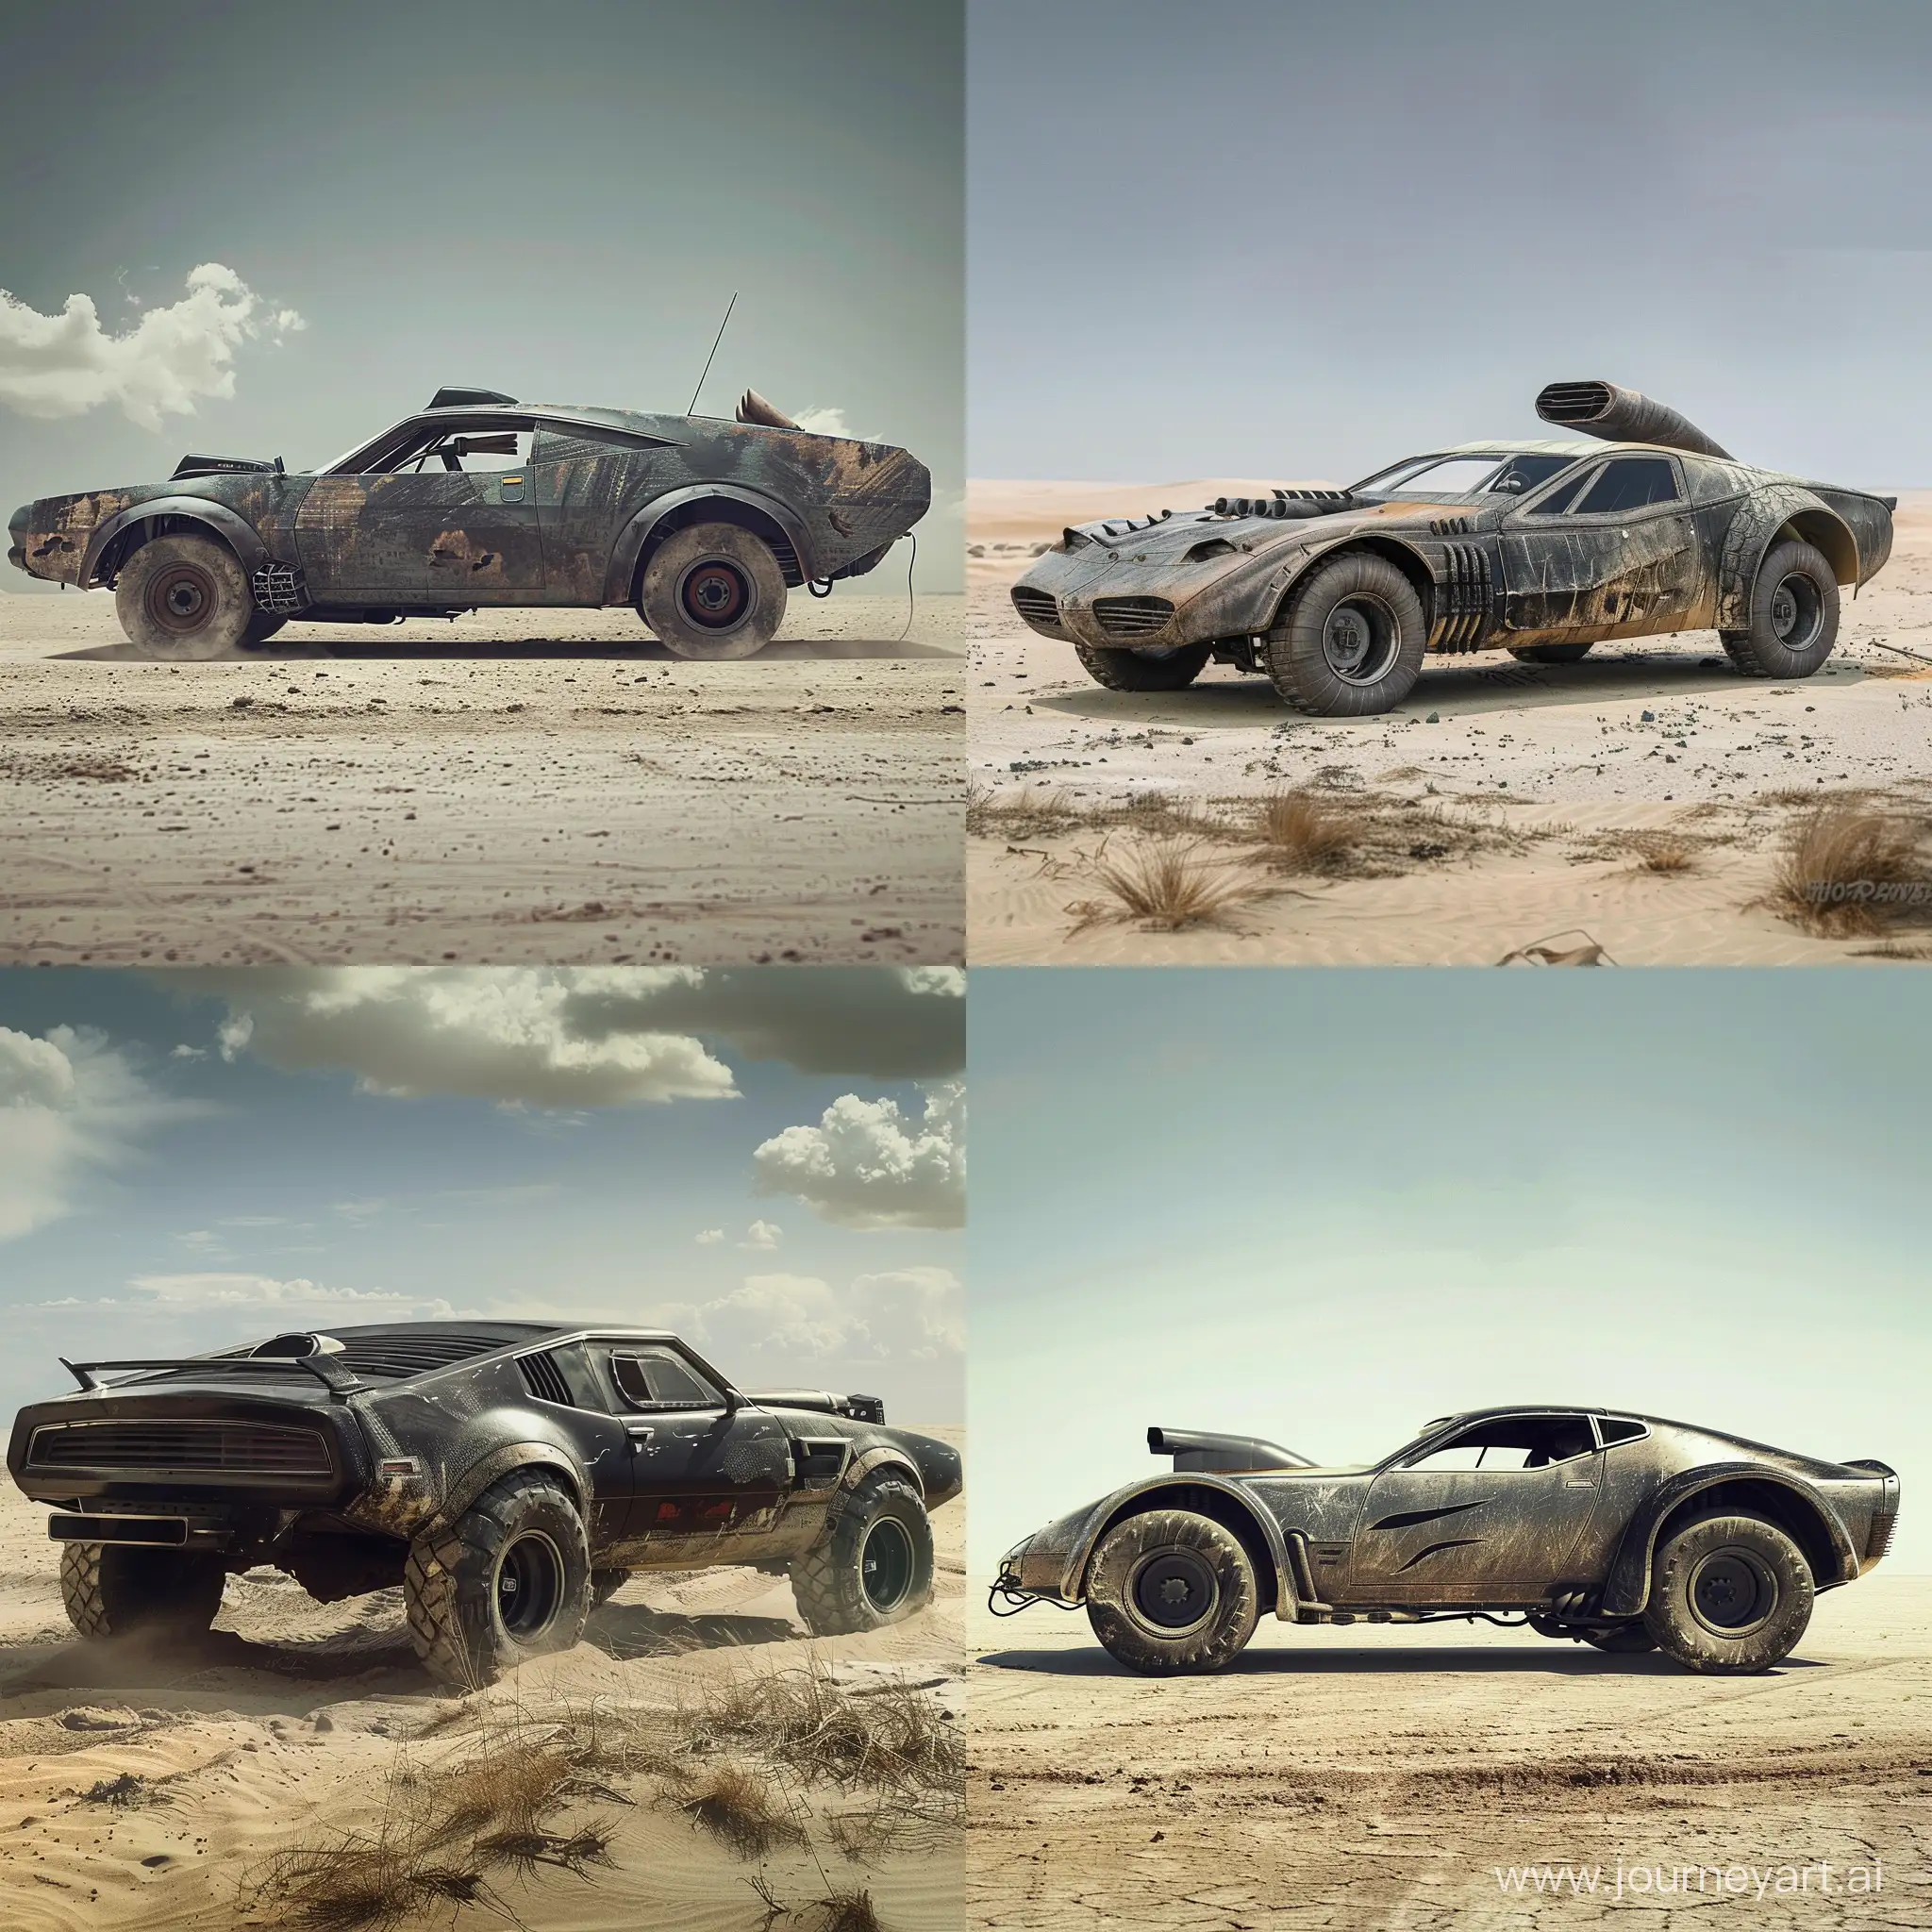 PostApocalyptic-Mad-Max-Style-Car-Wasteland-Vehicle-with-Menacing-Presence